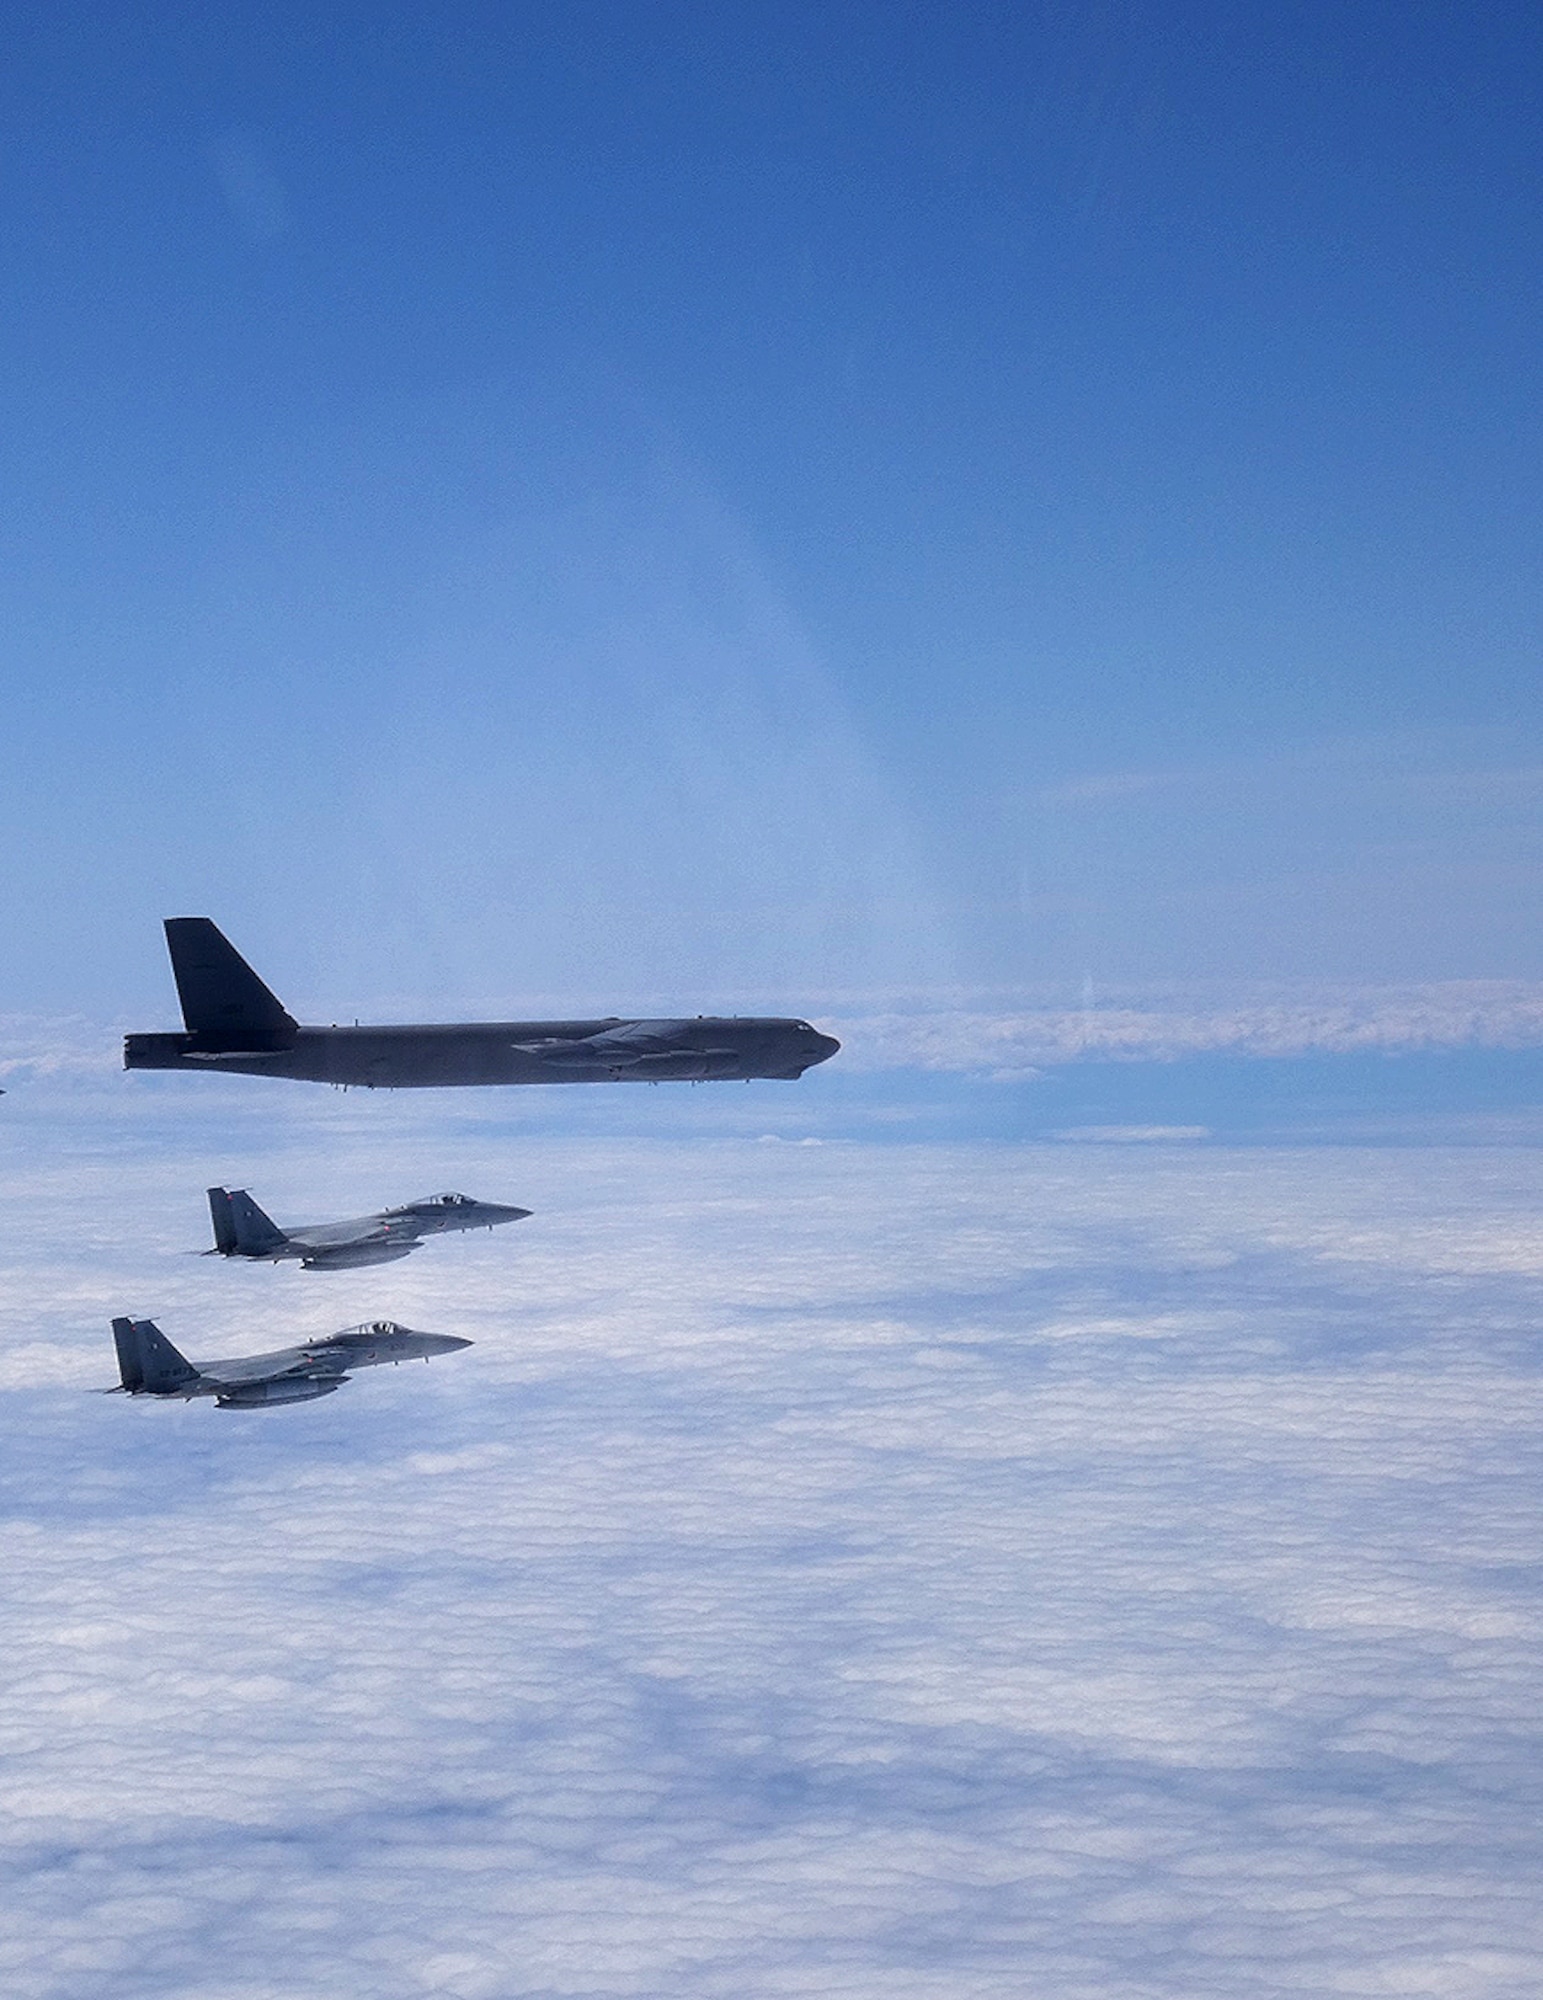 A B-52H Stratofortress deployed from Barksdale Air Force Base, La., flies alongside two Japan Air Self-Defense Force F-15s over the Sea of Japan while conducting a Bomber Task Force mission June 16, 2020. Bomber Task Force missions help maintain global stability and security while enabling units to become familiar with operations in different regions. (Courtesy photo)